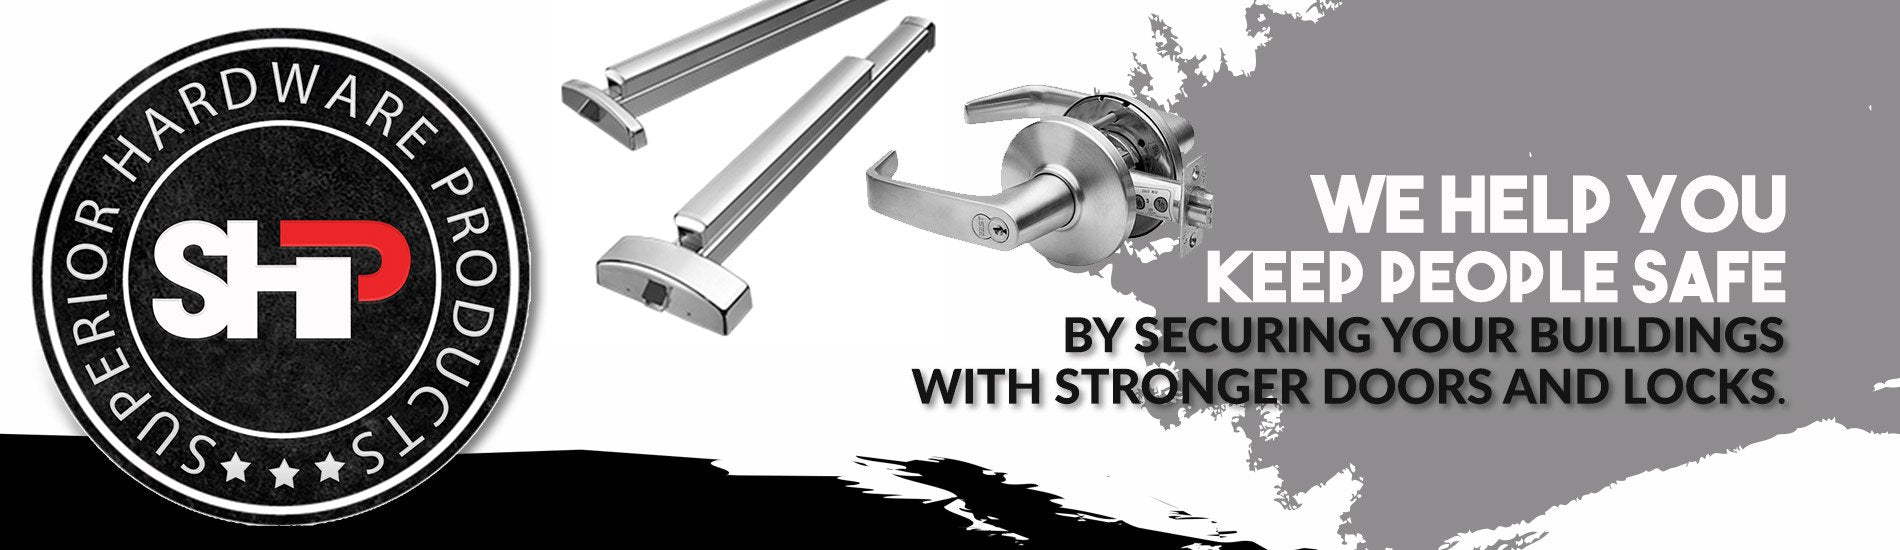 Superior Hardware Products - OFFICIAL SITE